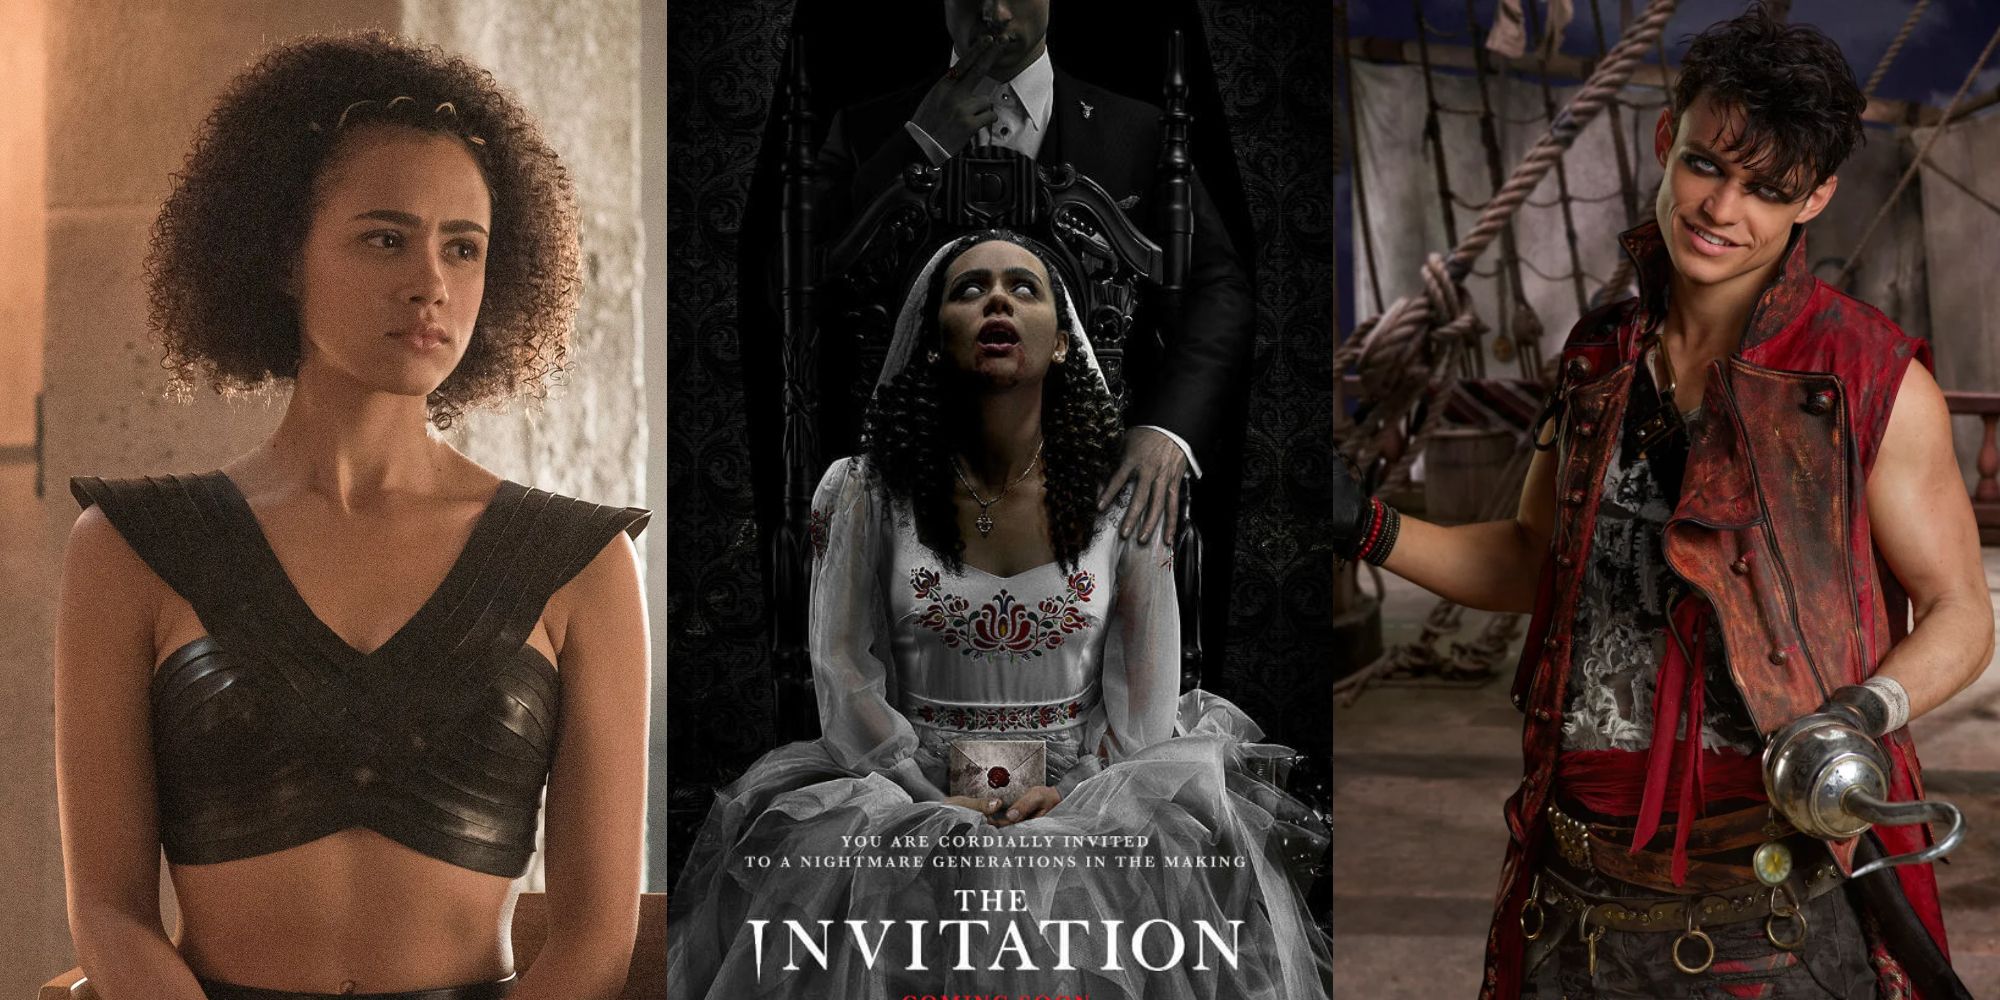 Nathalie Emmanuel in Game of Thrones, a poster for The Invitation, and Thomas Doherty as Harry Hook